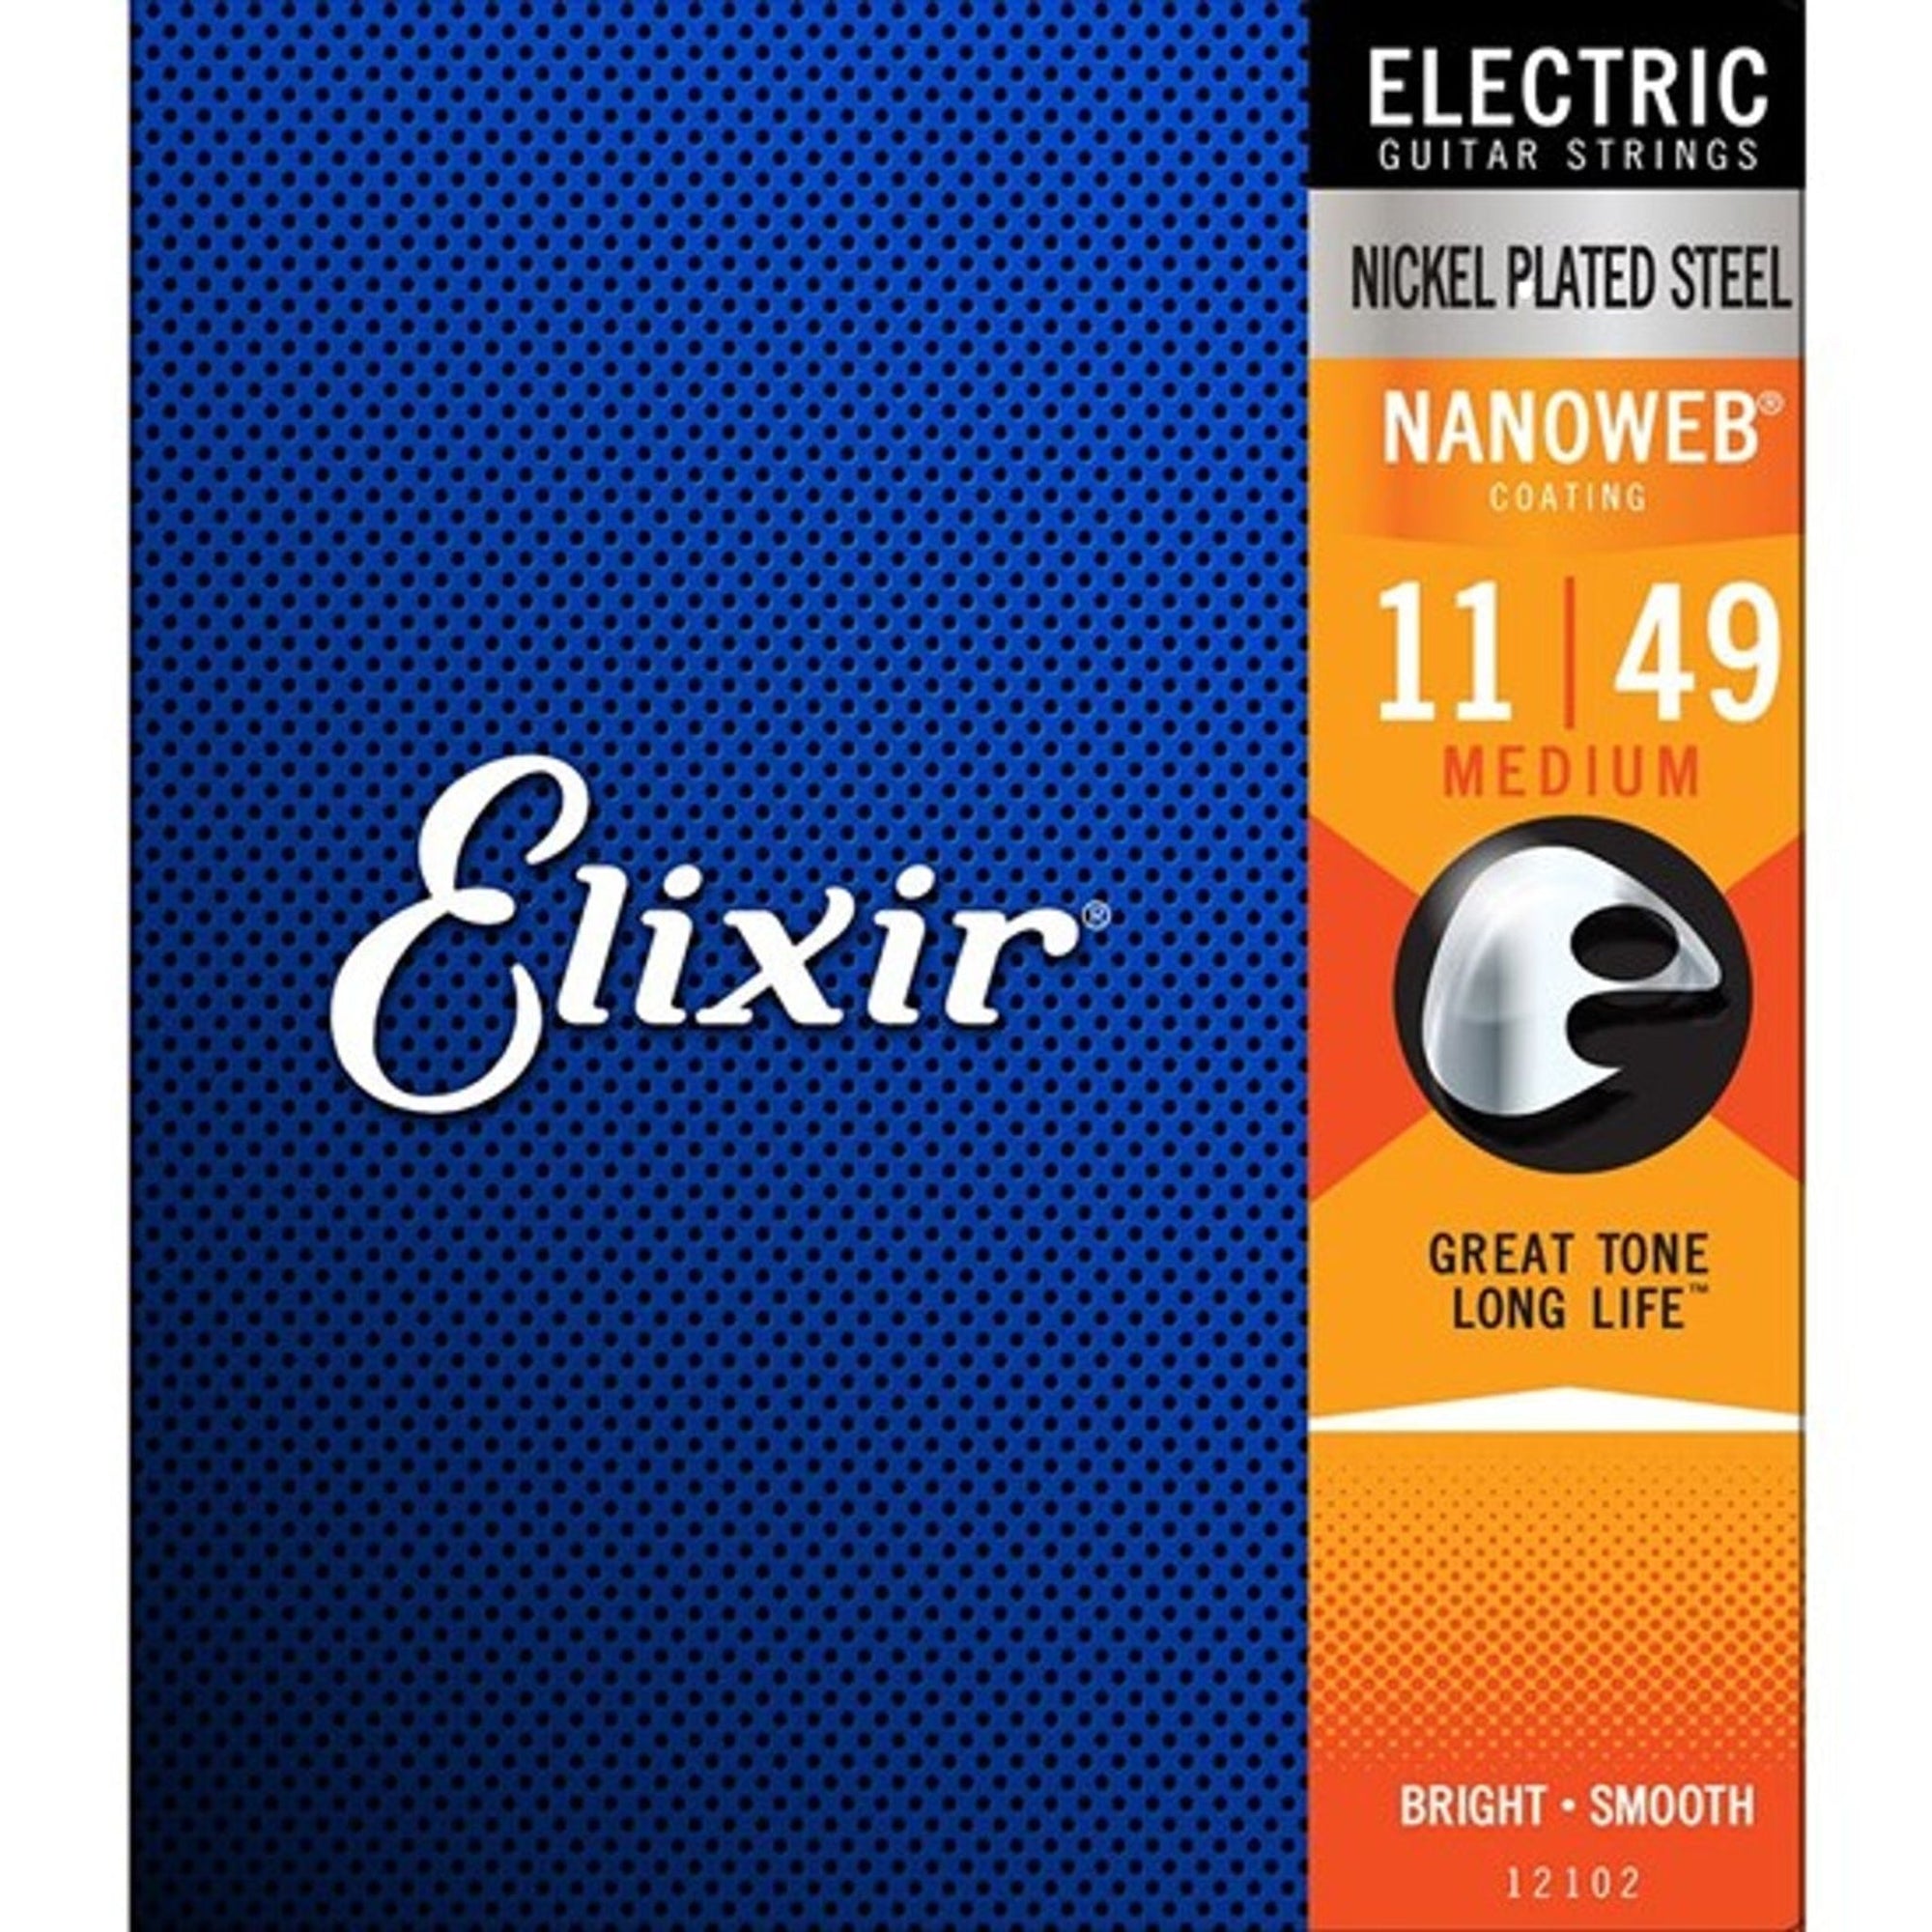 The Elixir 12102 medium strings are known for their great tone and long life. Elixir strings amp up your guitar’s tone life with the same premium electric guitar strings that experienced players worldwide trust